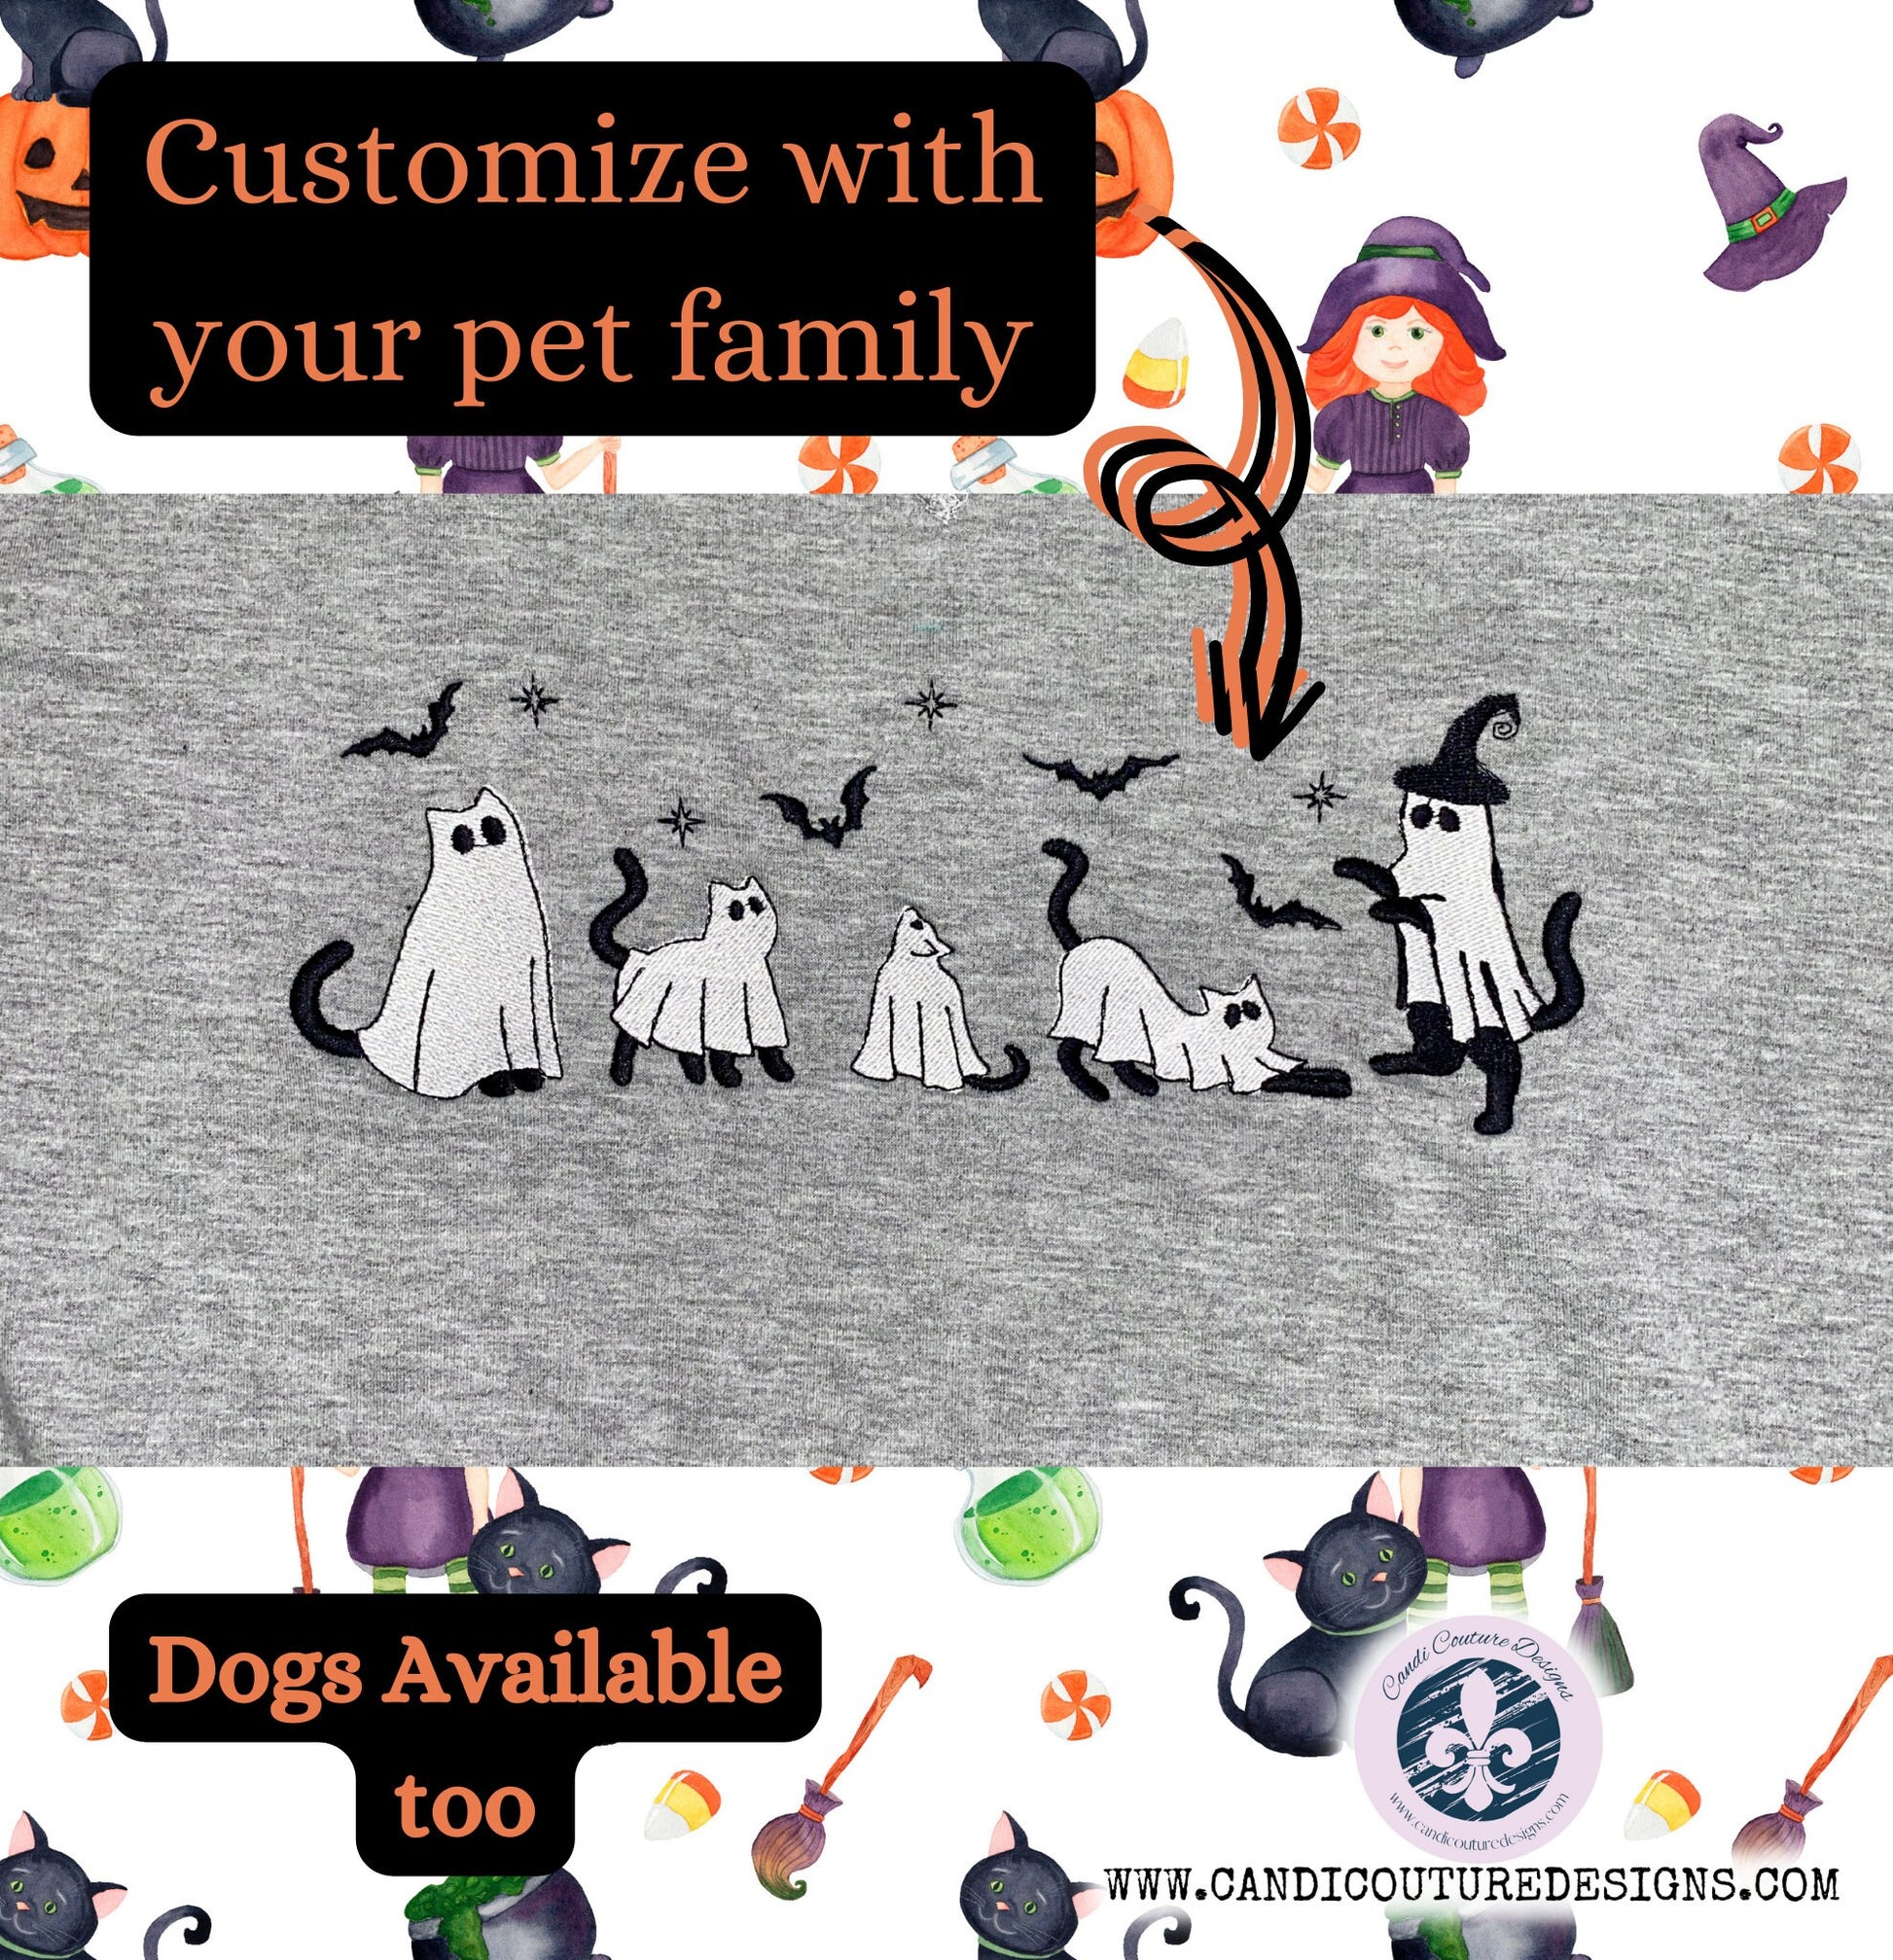 Halloween Cat Ghost Sweatshirt, Spooky Season Graphic Tee, Cozy Embroidered Sweater, Kitten Ghost Pullover, Personalized Gift, Customizable